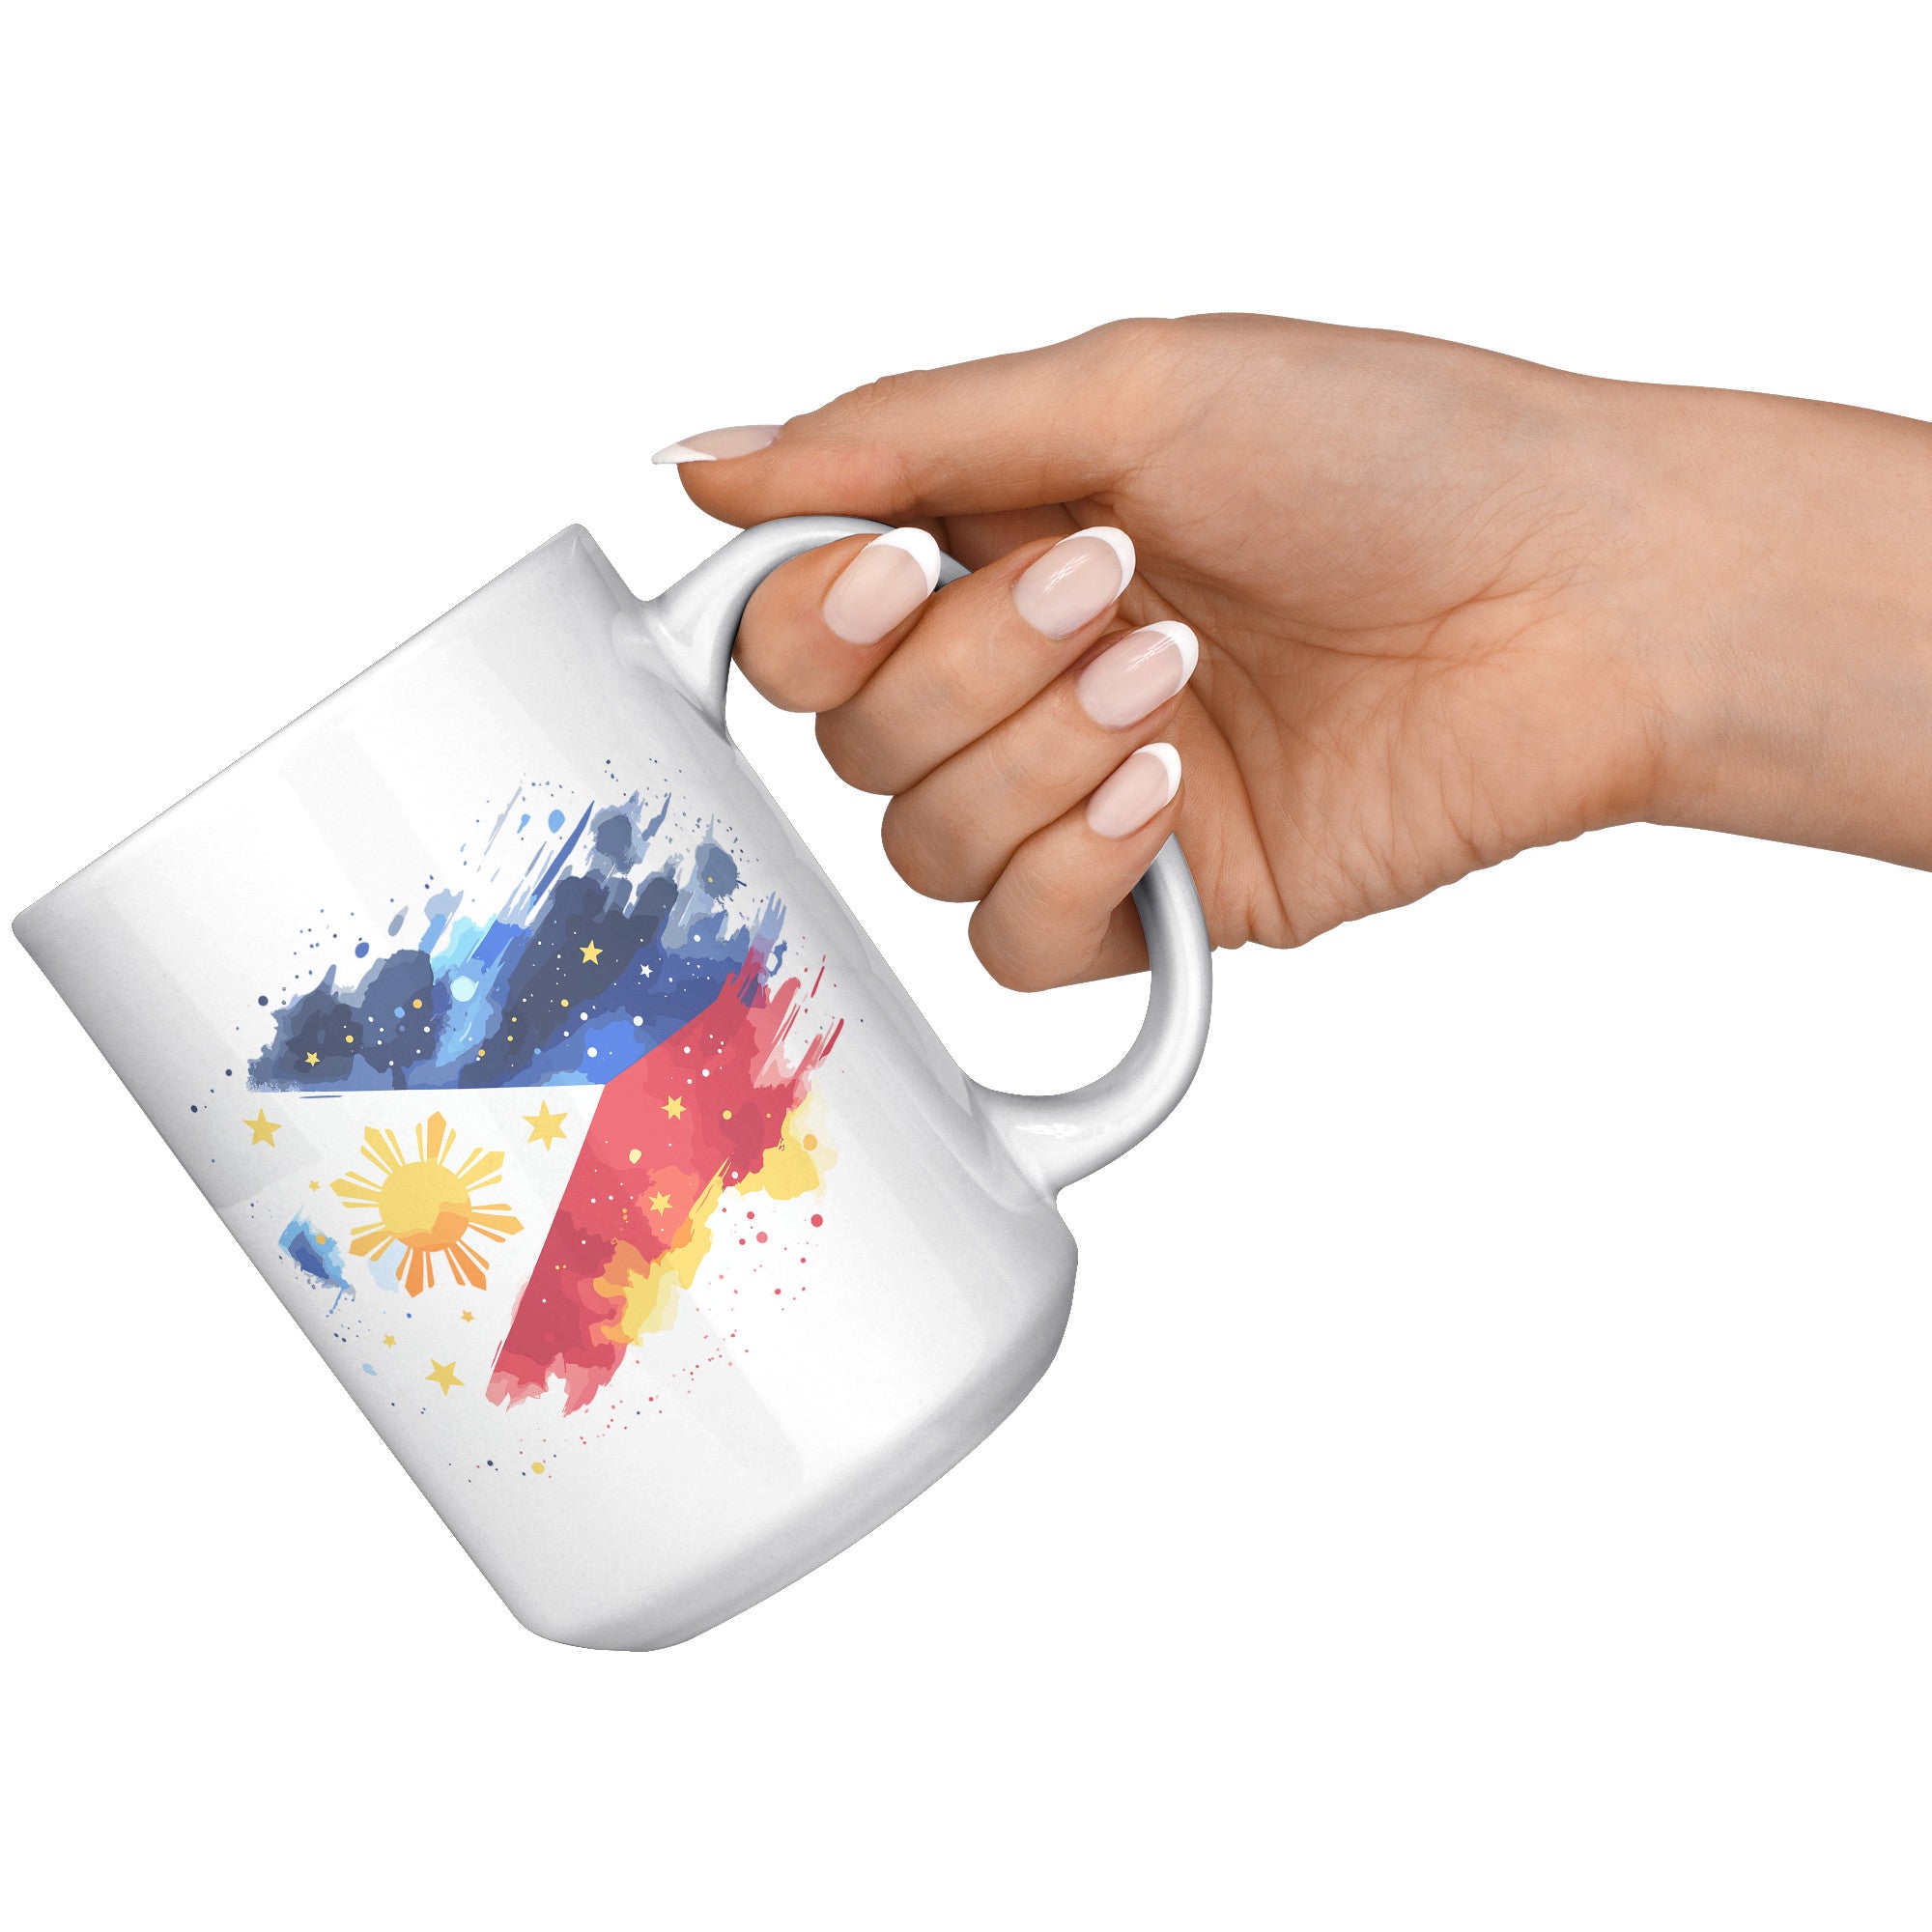 Proudly Pinoy Coffee Mug - Vibrant Filipino Flag Design - Patriotic Gift for Filipinos - Celebrate Heritage with Every Sip!" - C1